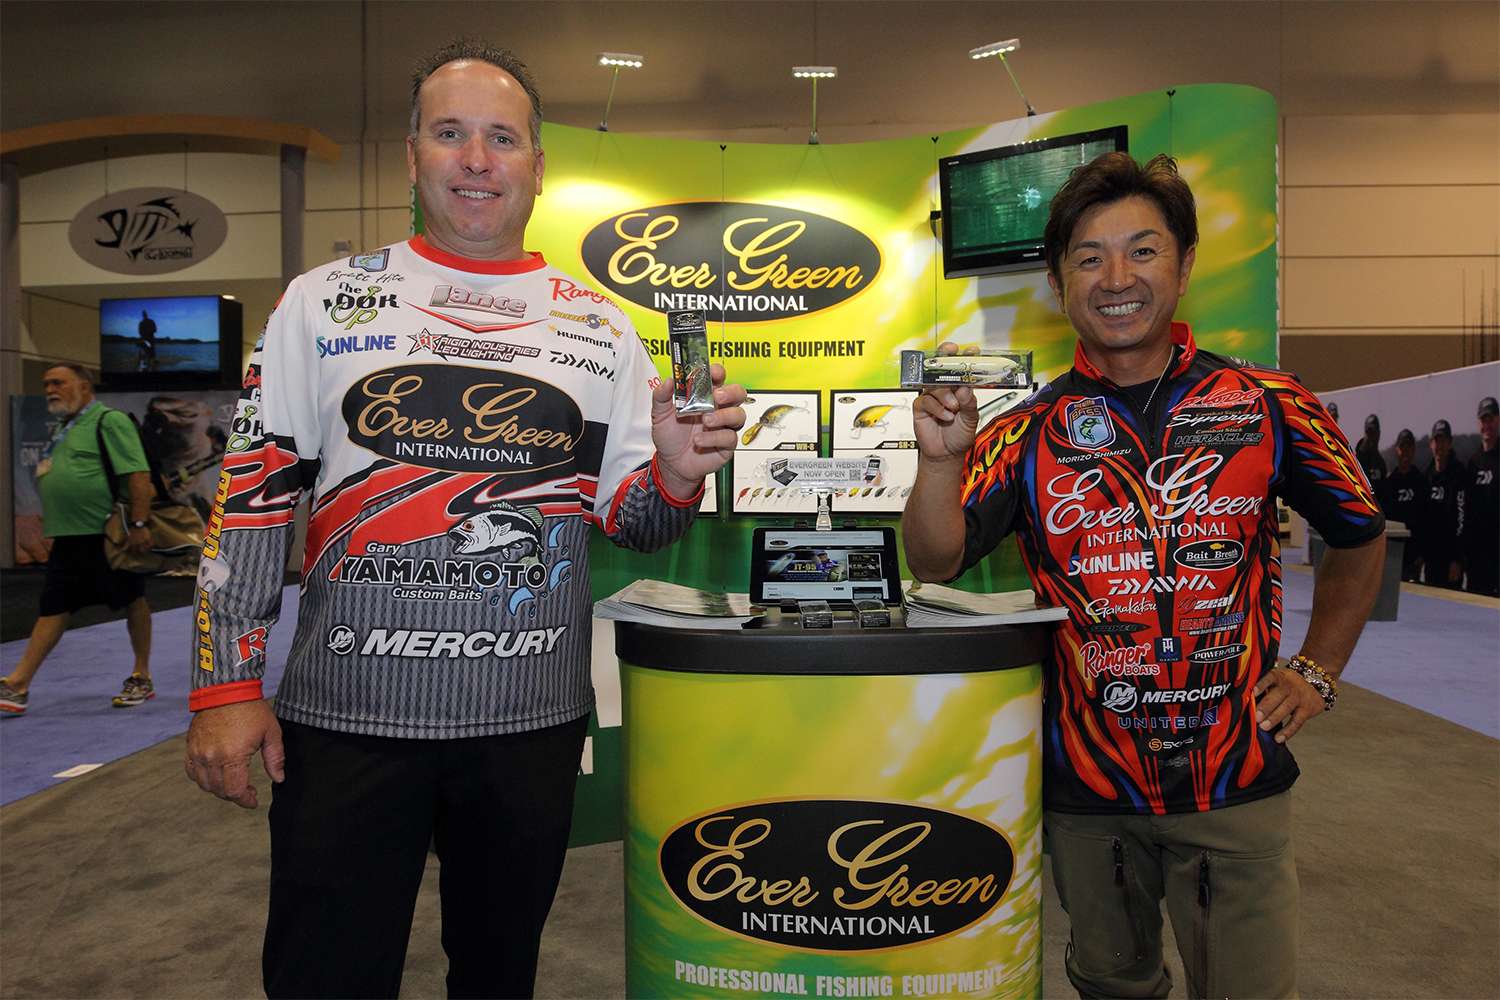 Brett Hite and Morizu Shimizu make others green with envy with their Ever Green.